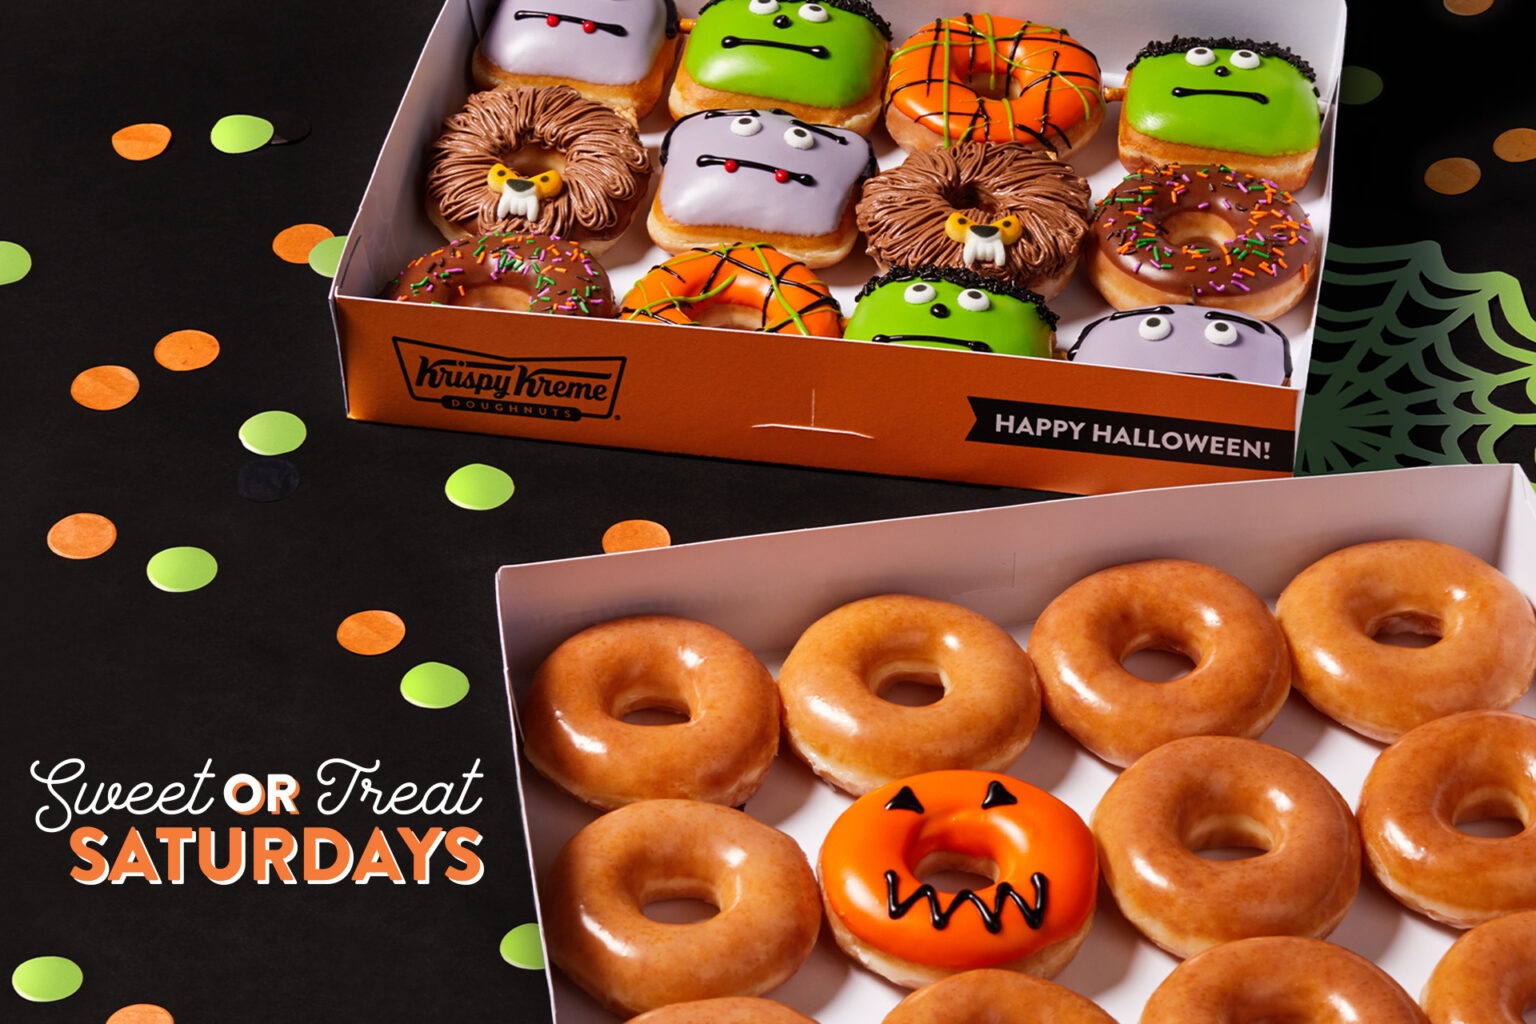 Krispy Kreme Is Releasing Halloween Donuts and You Can Get One Free